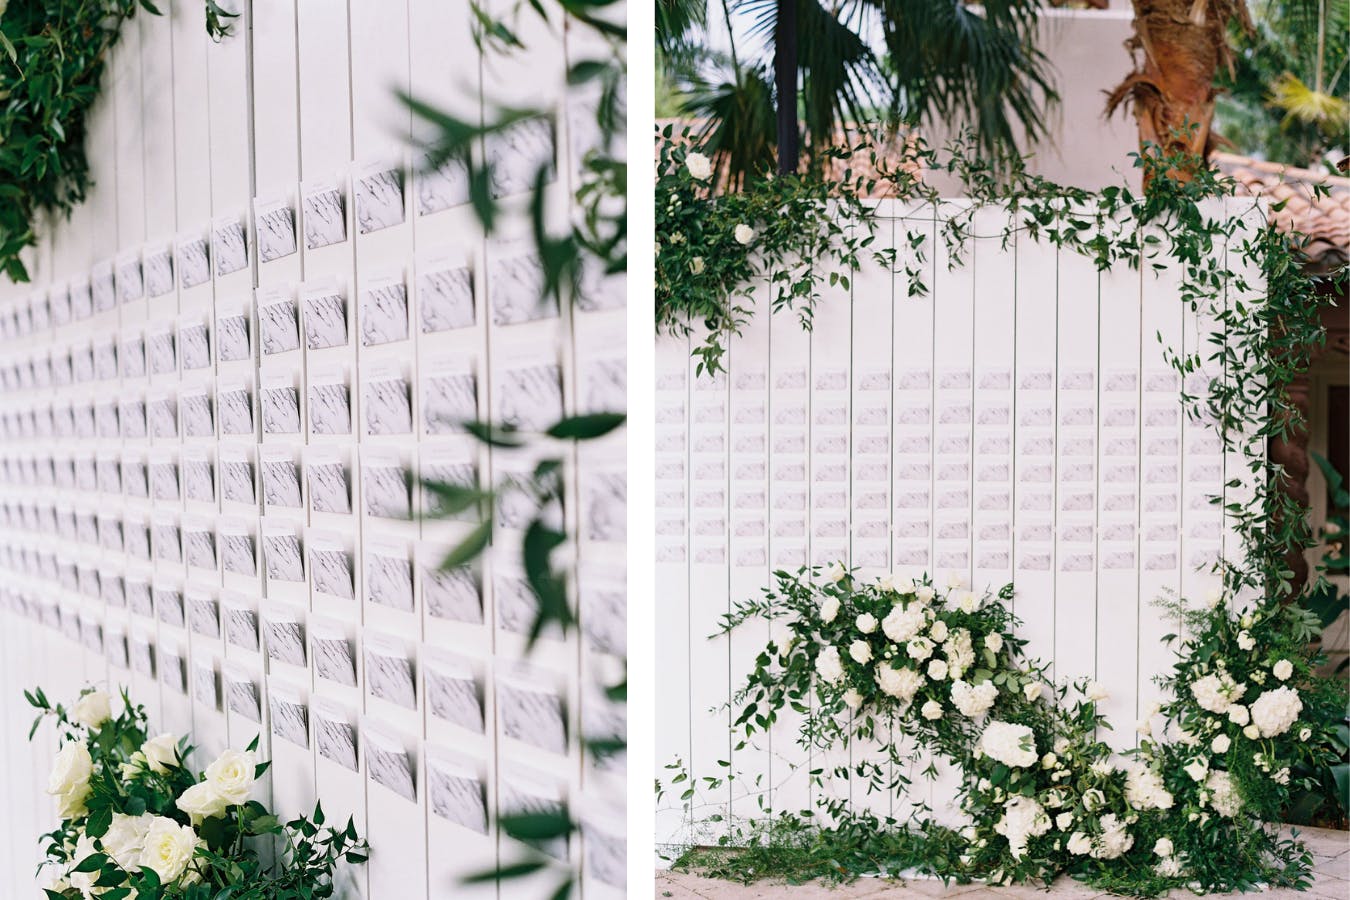 Marbled Escort Cards Attached To White Fence Backdrop With Greenery and White Flowers | PartySlate